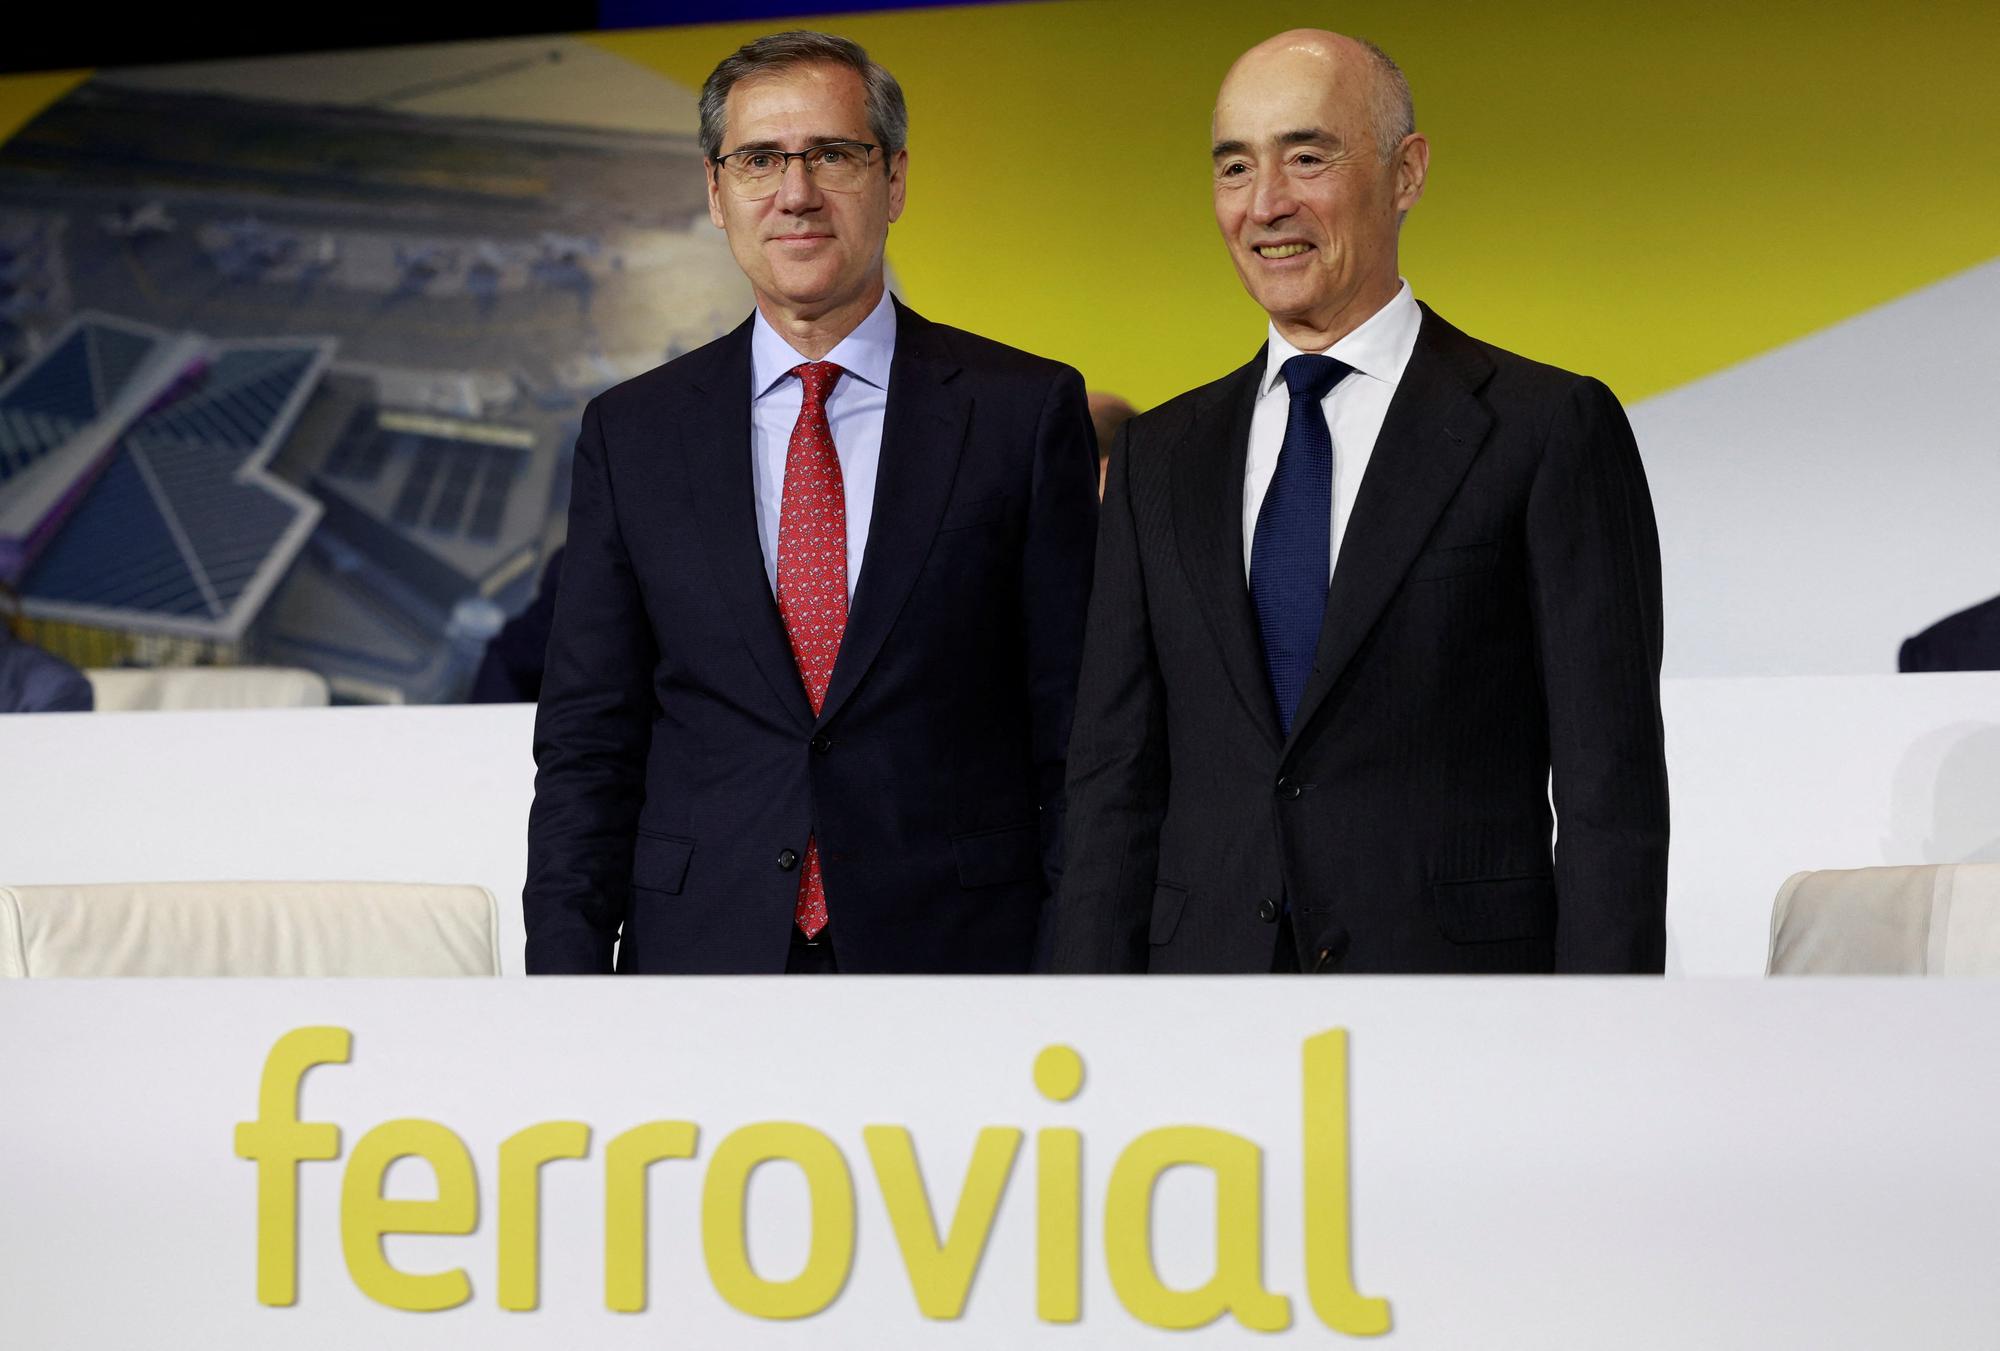 Ferrovial shareholders vote on move to Amsterdam